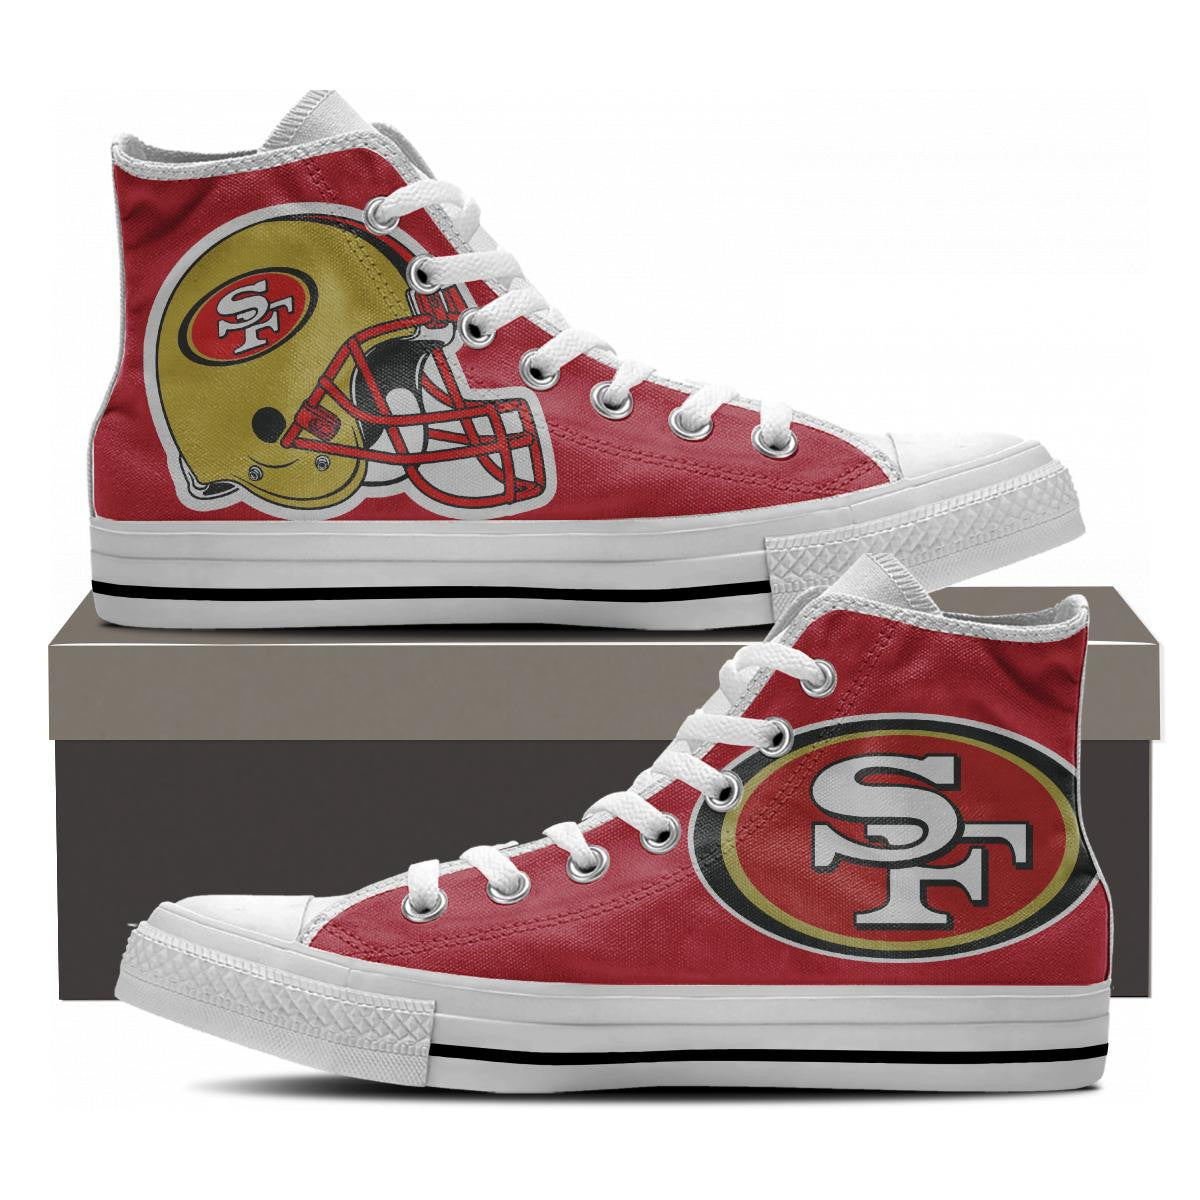 San Francisco Fans High Tops - Cool Tees and Things